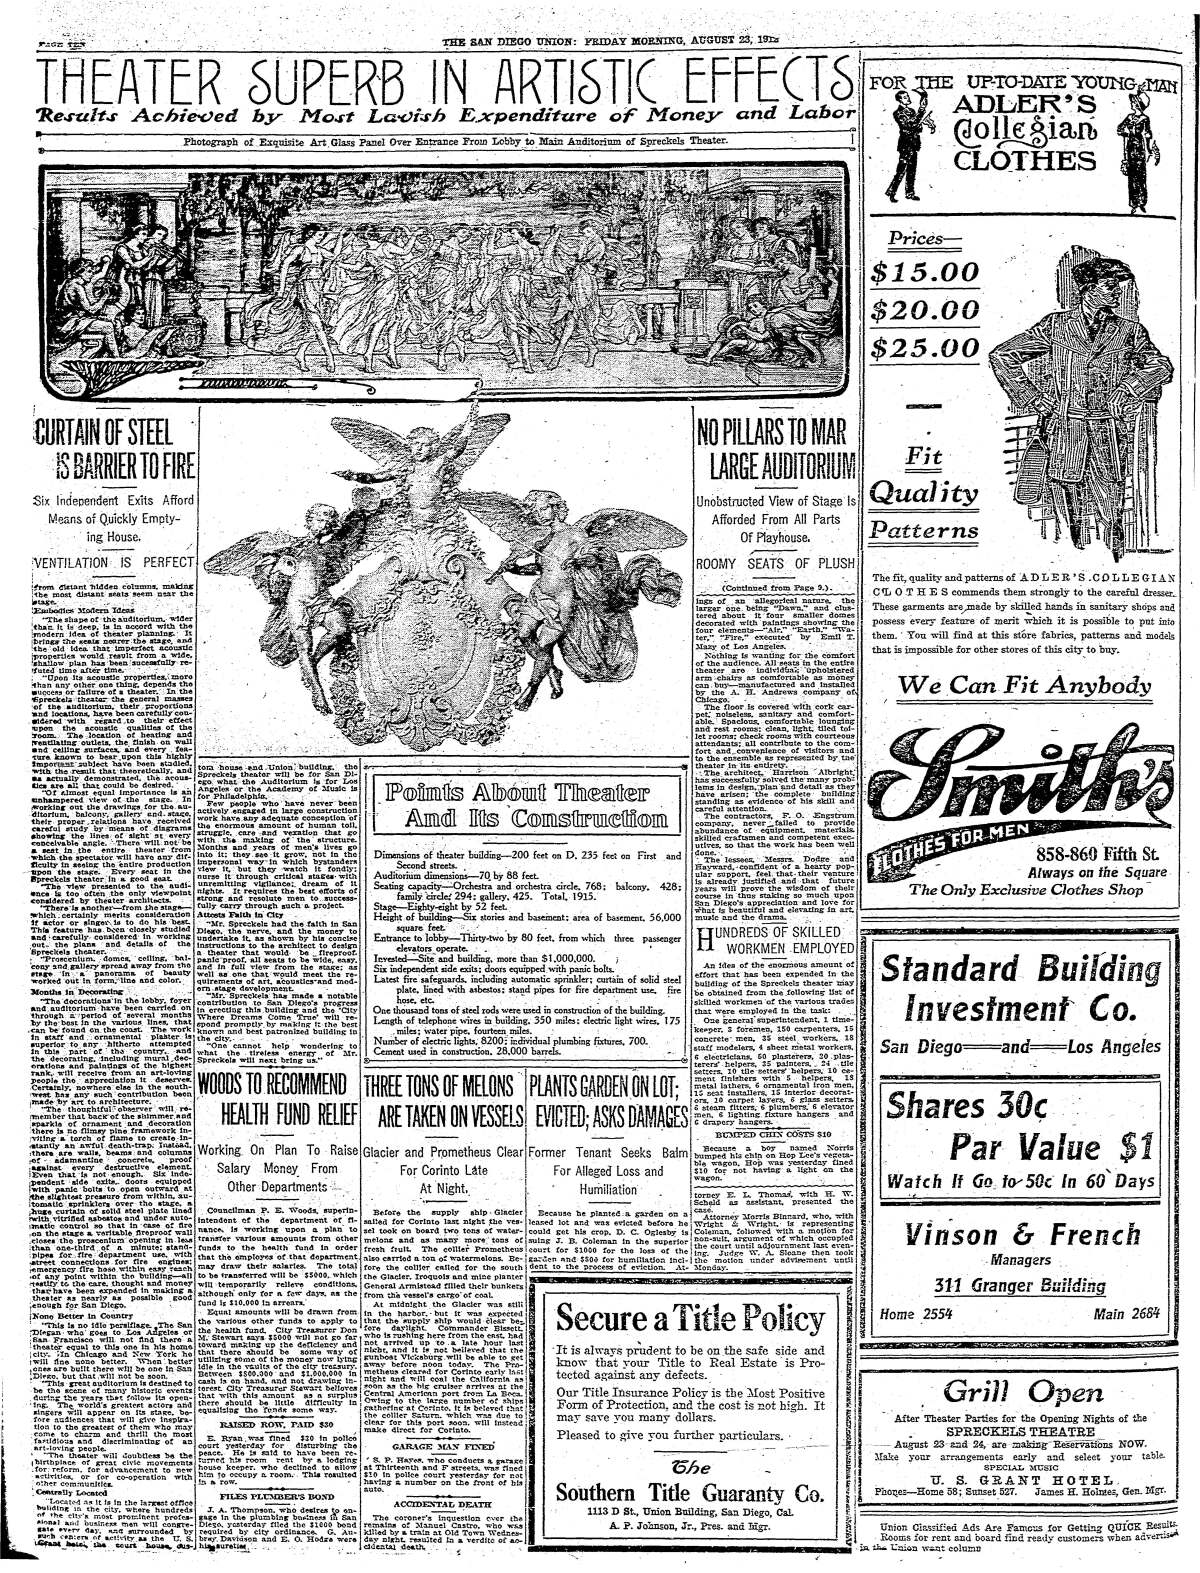 A photo of the interior of the Spreckels Theater was published in the San Diego Union on Aug. 23, 1912.